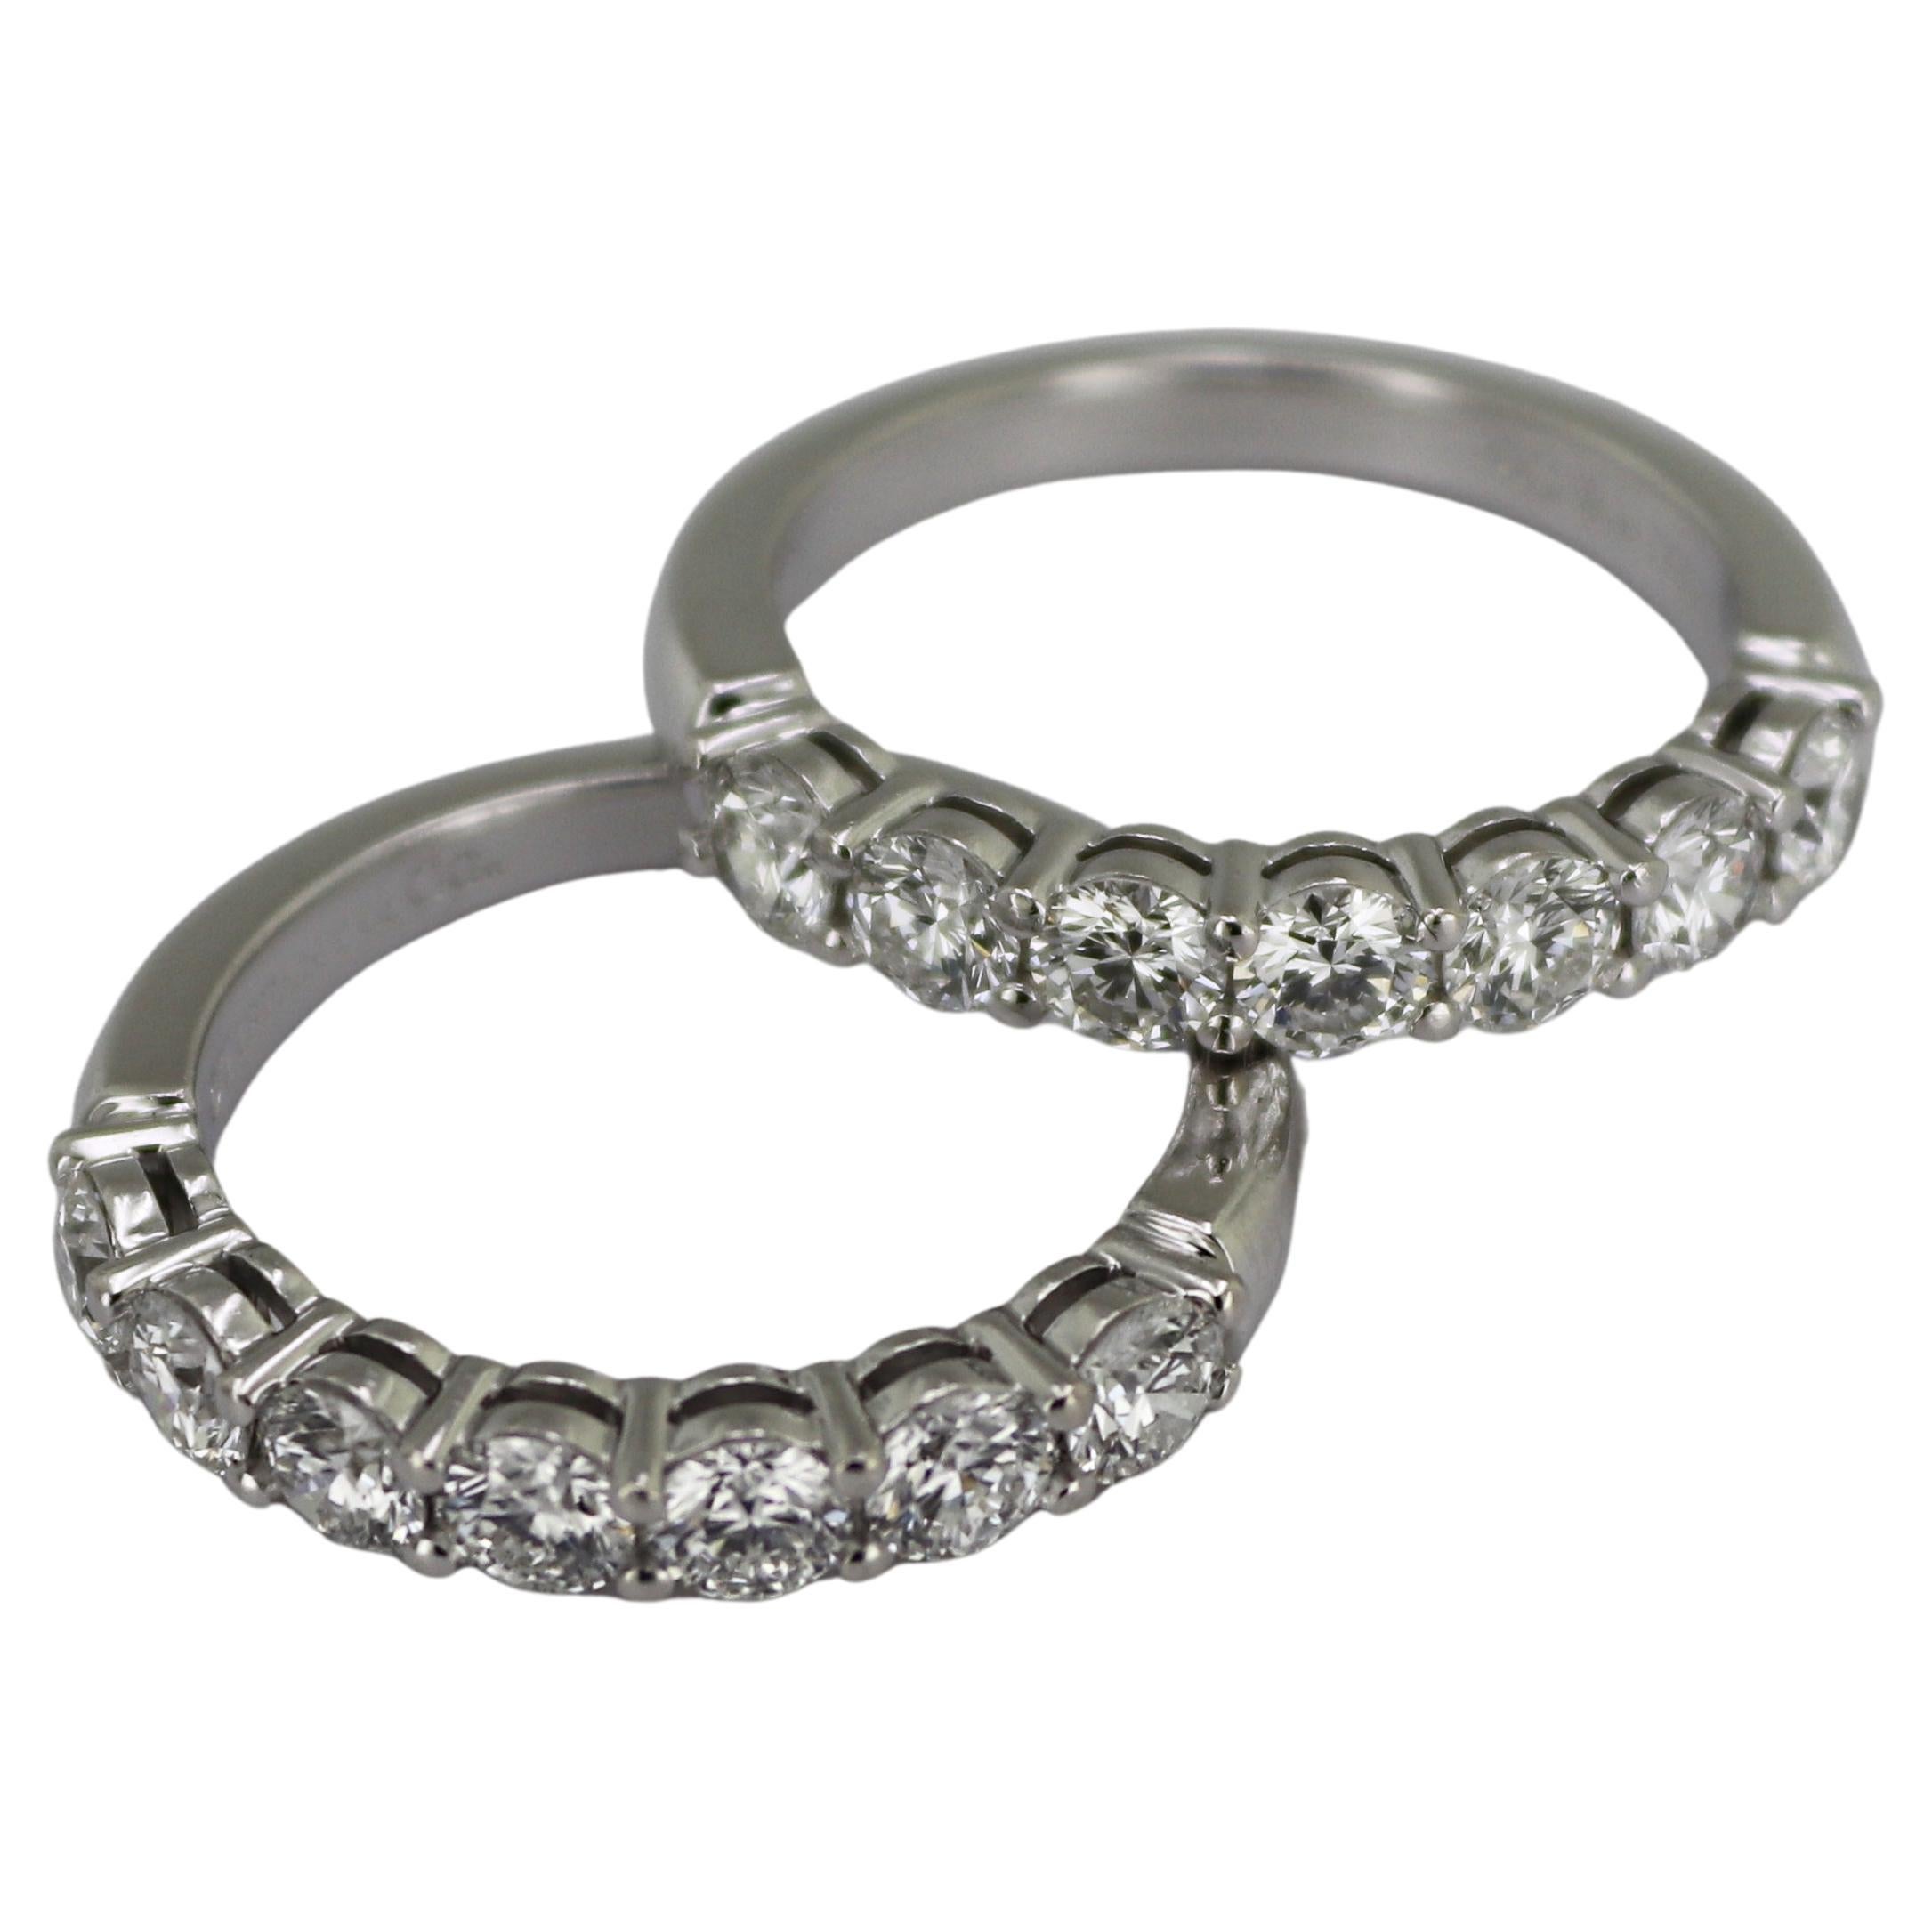 Two Tiffany & Co “Embrace” Diamond, Platinum Band Ring Set For Sale